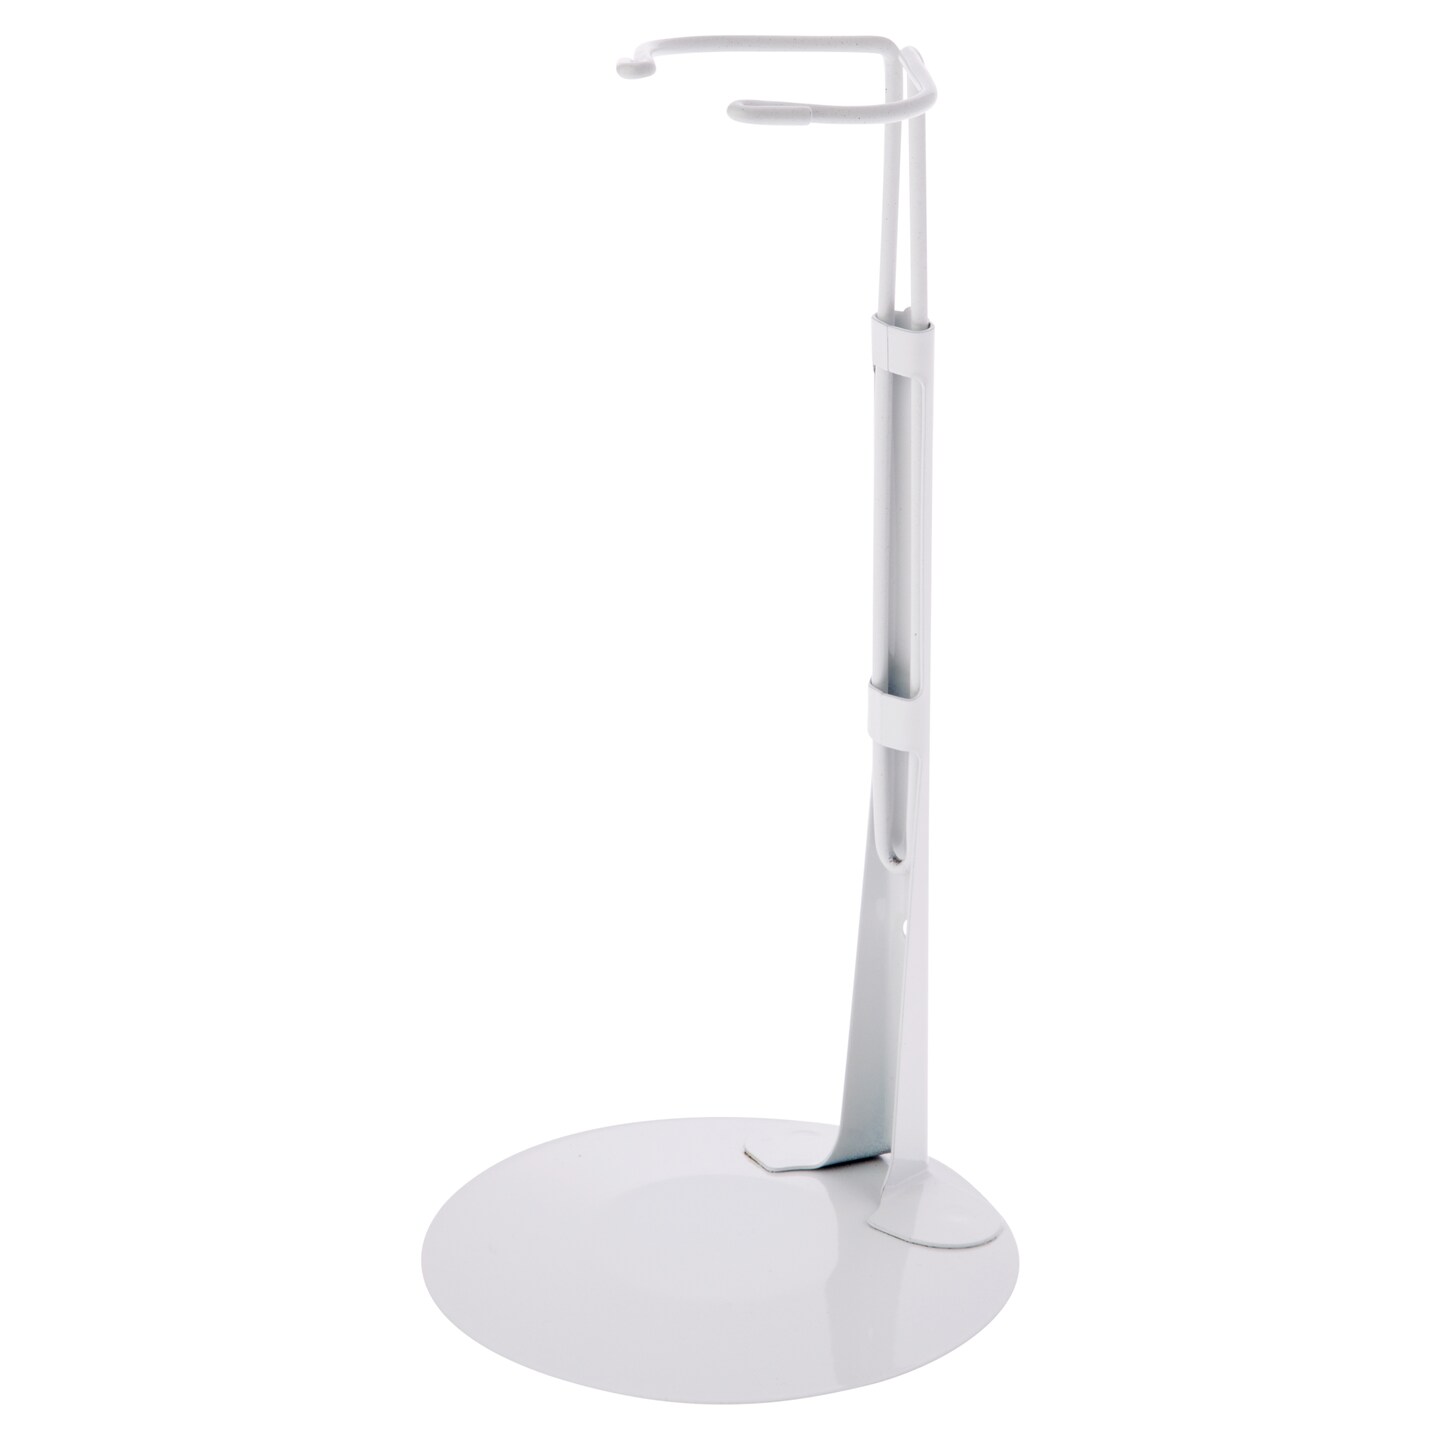 Kaiser 2501 White Adjustable Doll Stand, fits 12 to 17 inch Dolls or Action Figures, waist width adjusts from 2 to 2.5 inches